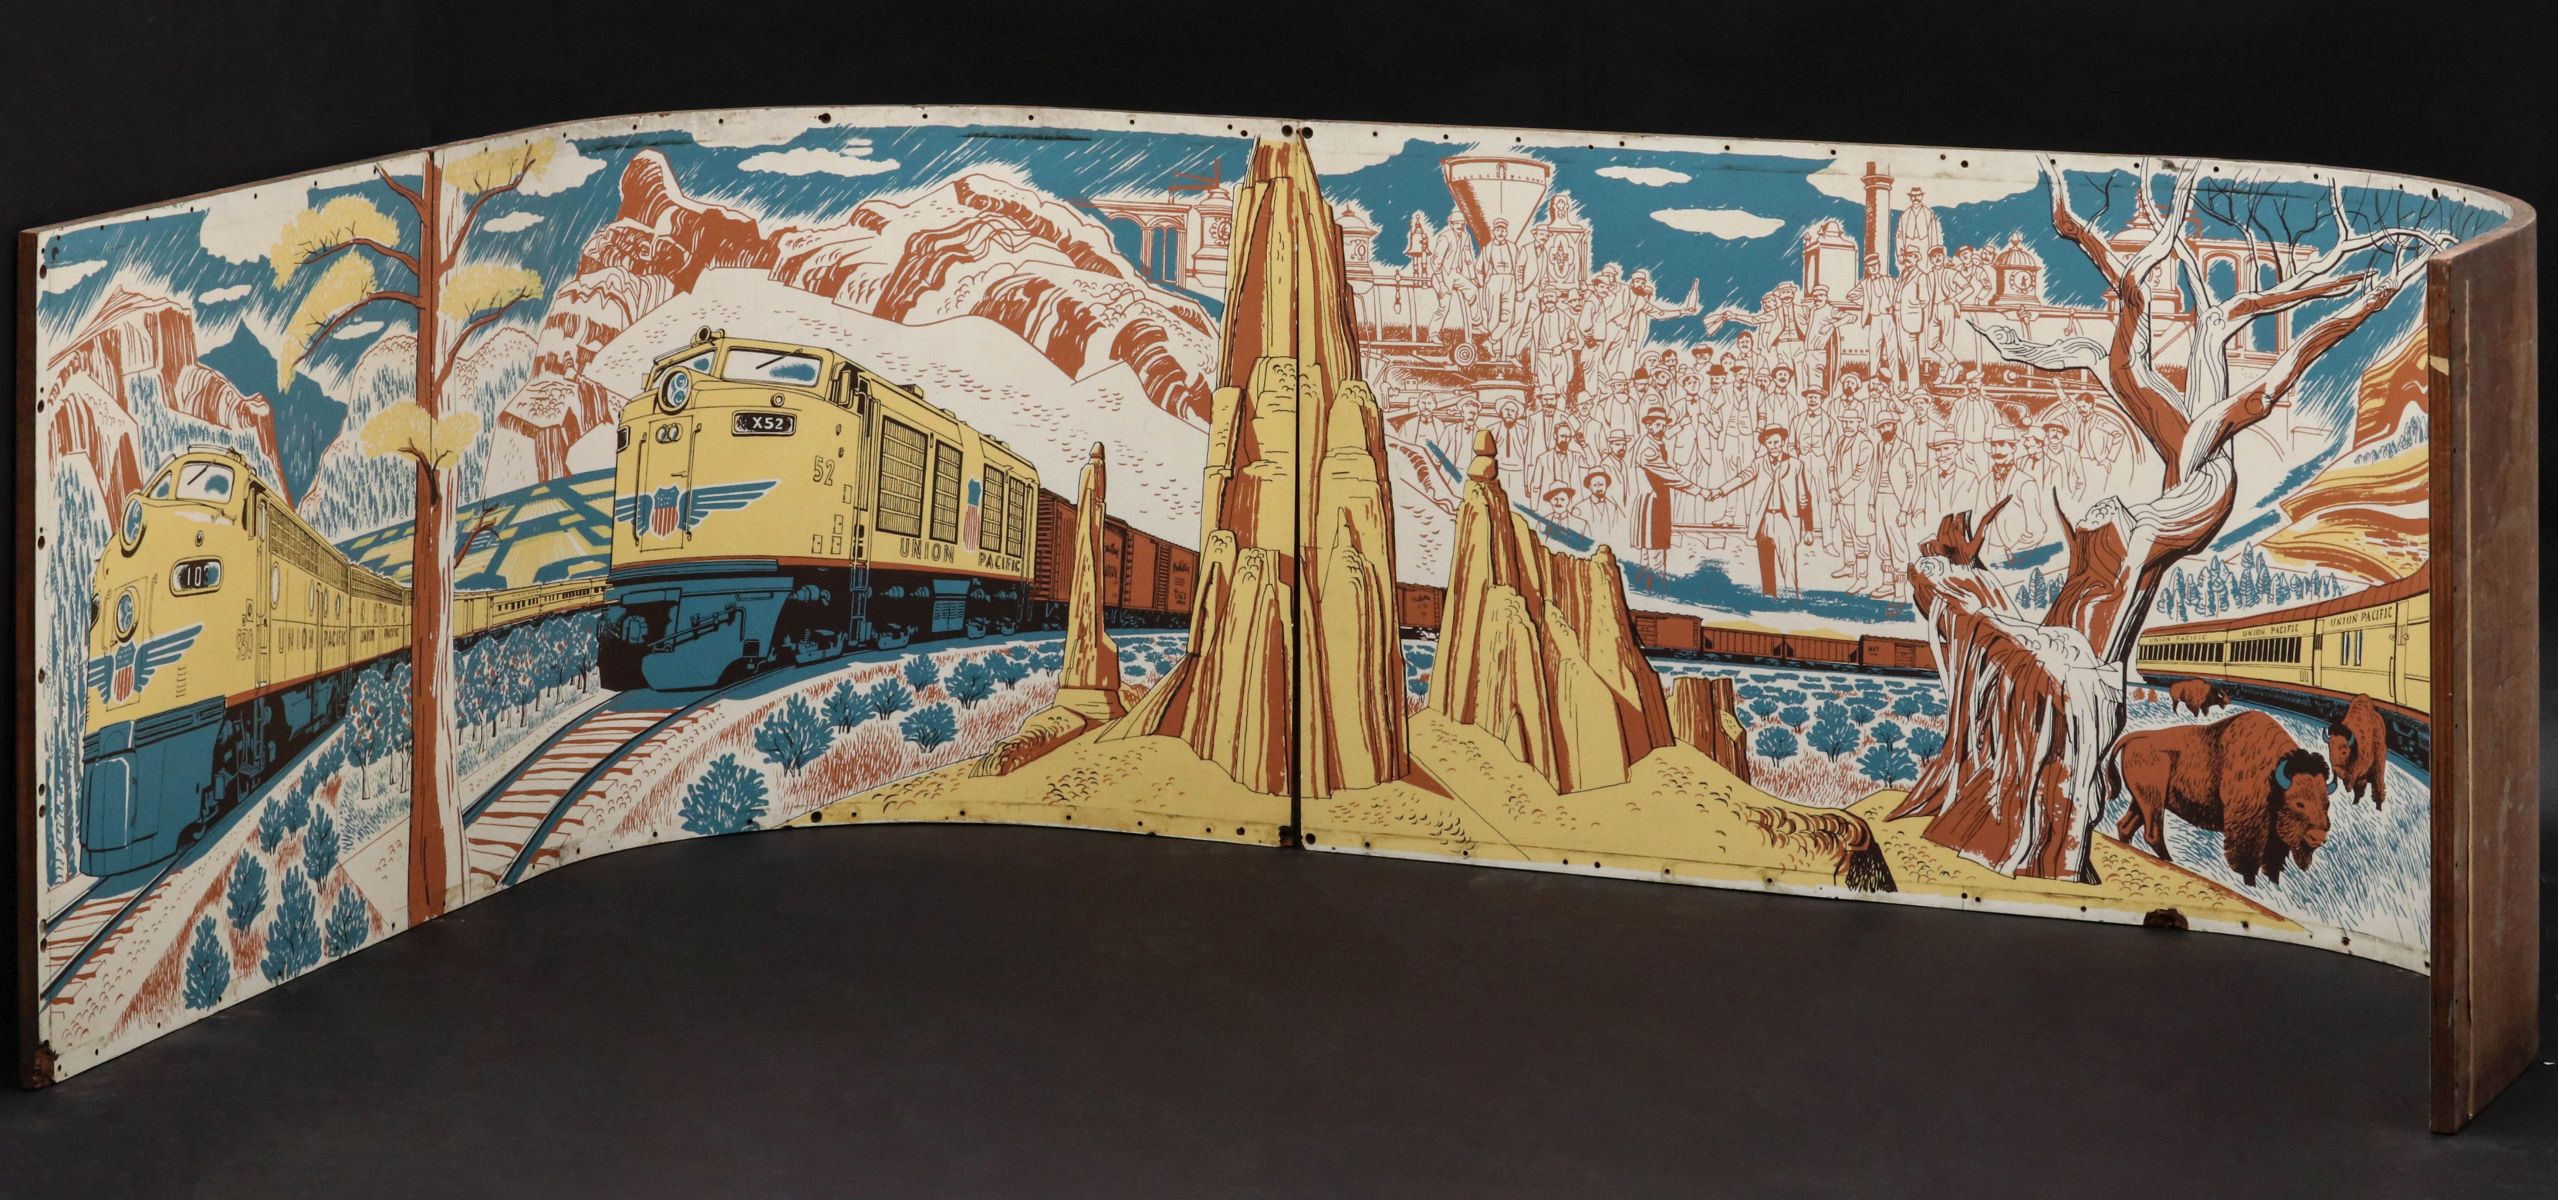 A UNION PACIFIC RAIL MURAL WITH STREAMLINER CITY OF LA